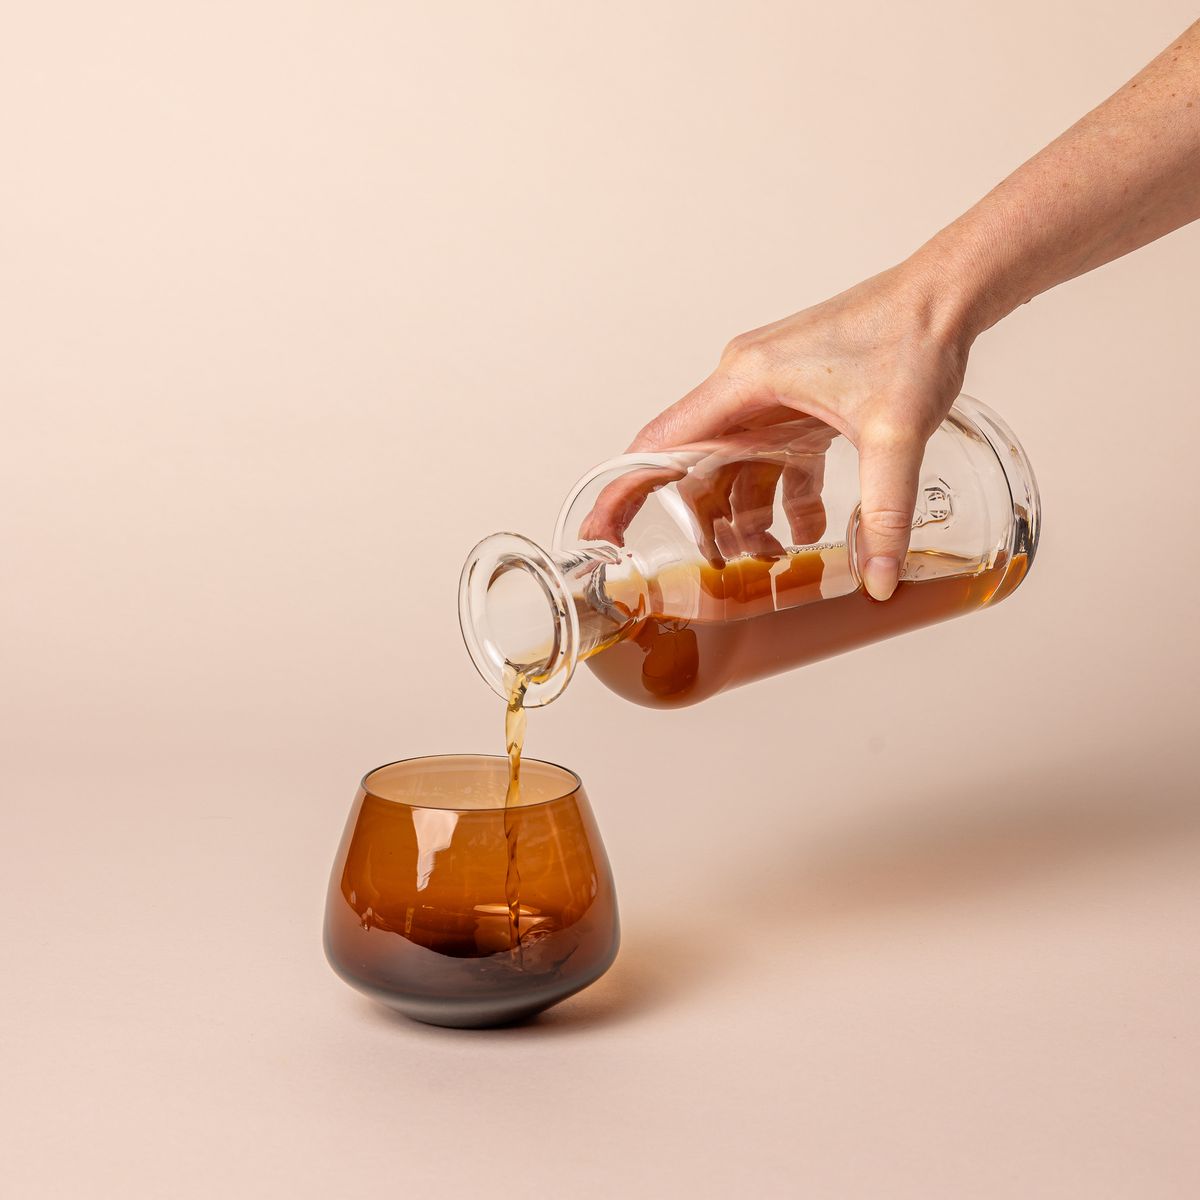 A hand holding a clear glass decanter of whiskey and pouring it into a brown glass whiskey snifter with a rounded base